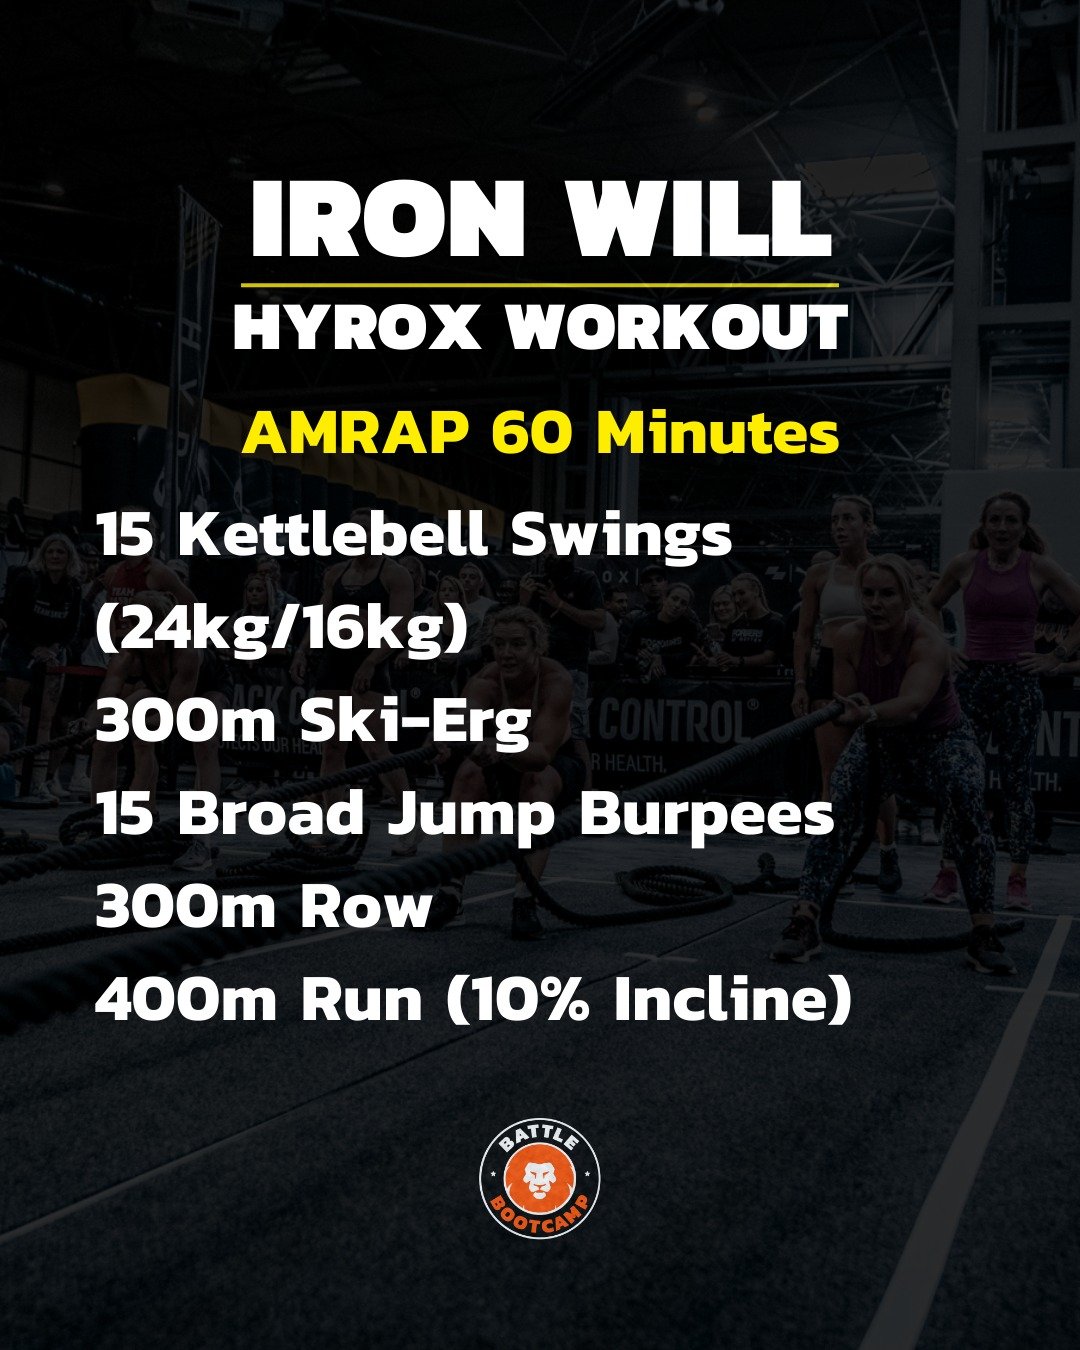 Try this Hyrox-focused workout. It's sure to get your heart rate fired up! 🔥

IRON WILL

AMRAP 60 Minutes
15 Kettlebell Swings (24kg/16kg)
300m Ski-Erg
CONTROL&reg;
R HEALTH.
15 Broad Jump Burpees
300m Row
400m Run (10% Incline)

Let us know how you